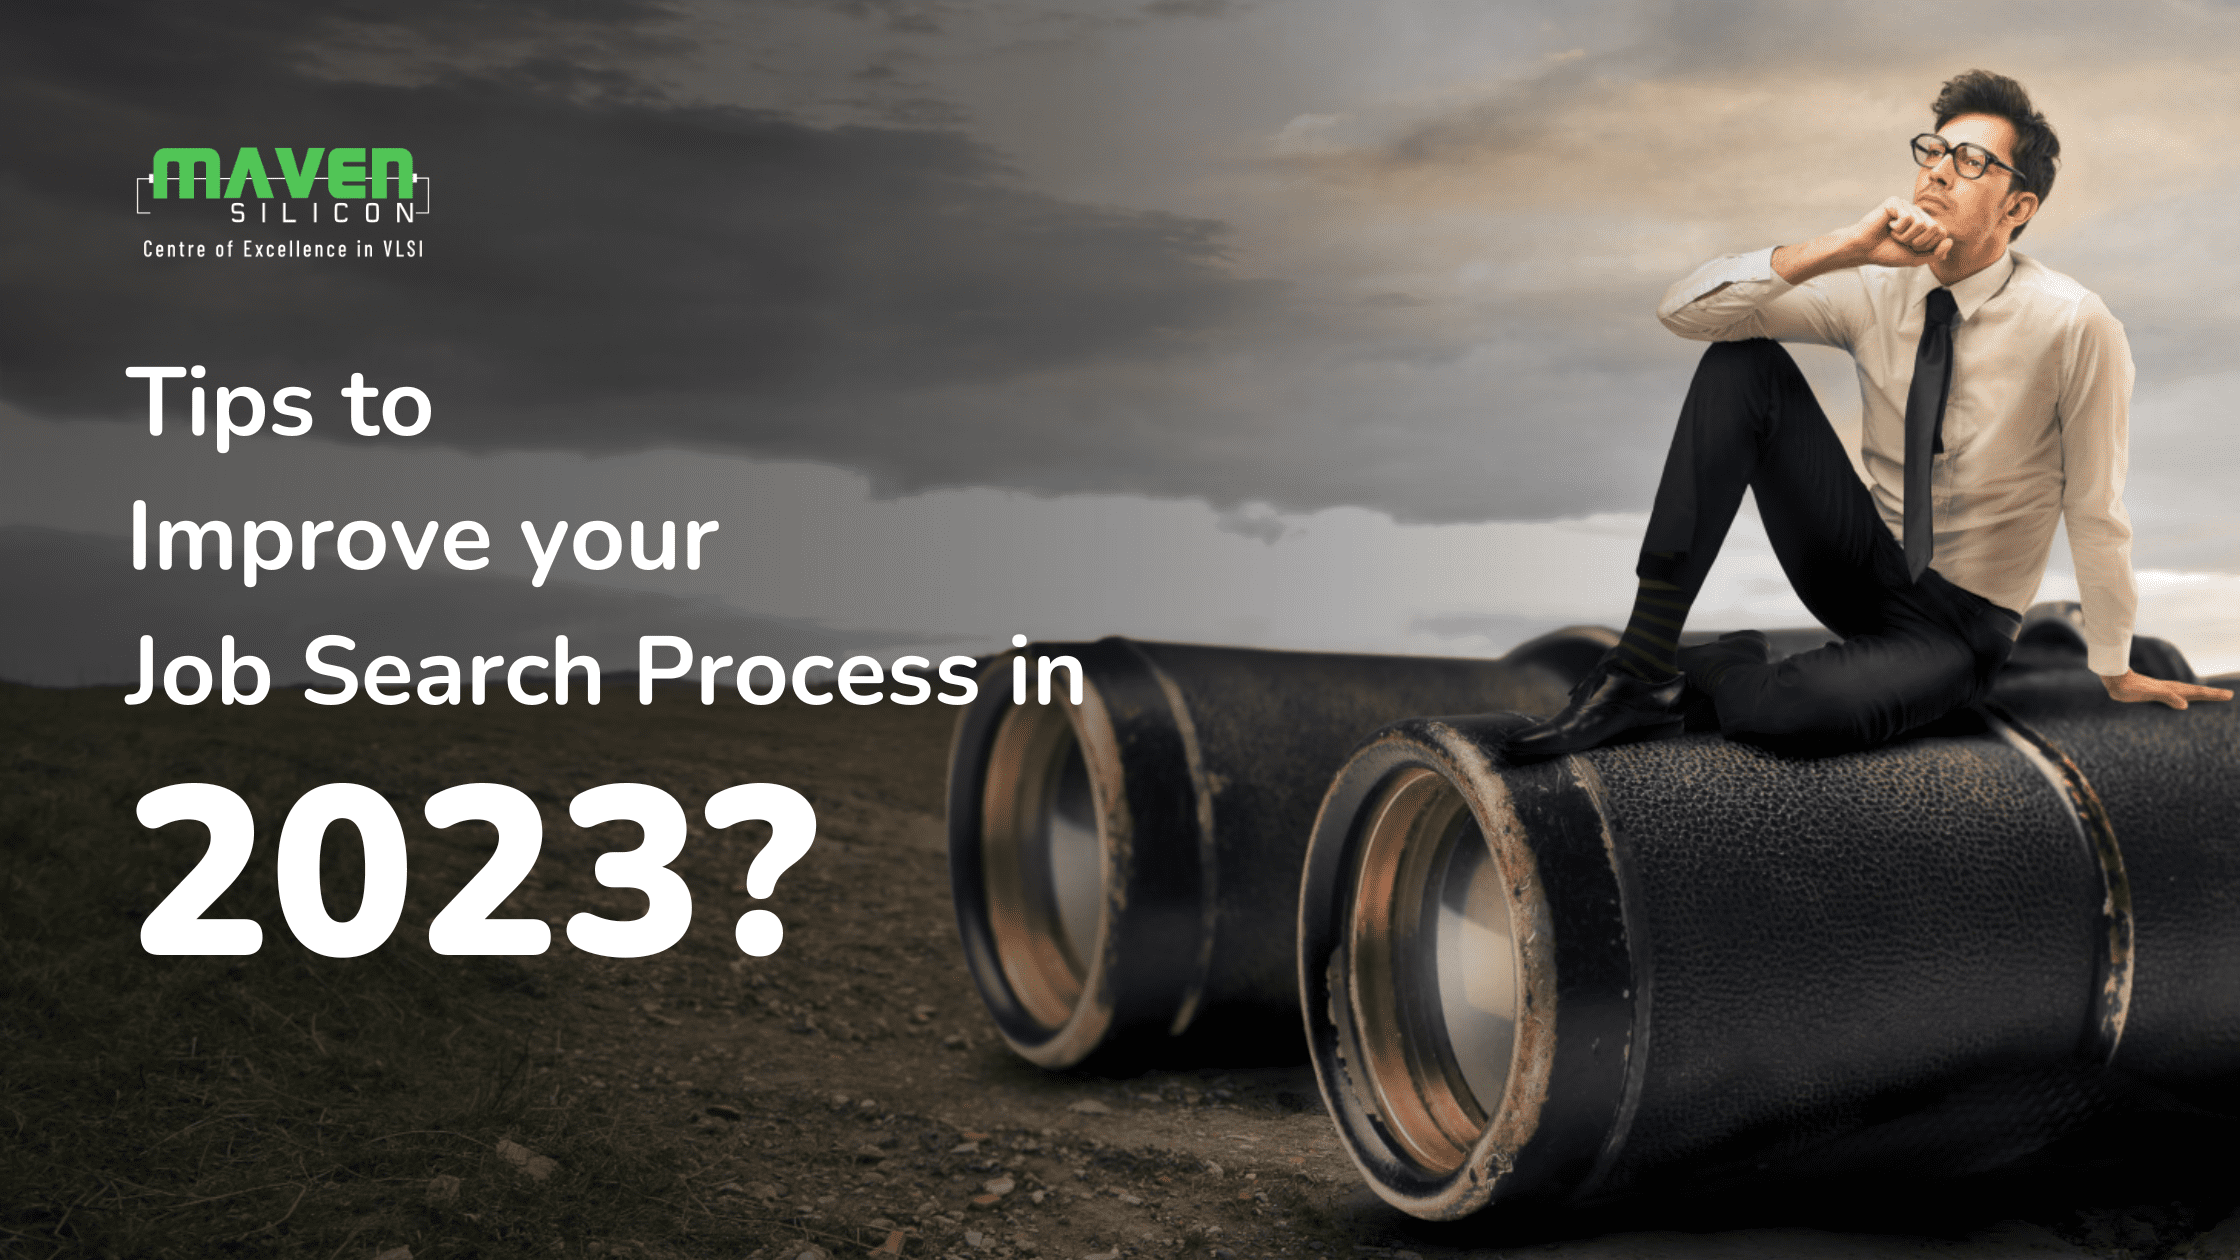 Tips to Improve your Job Search Process in 2023